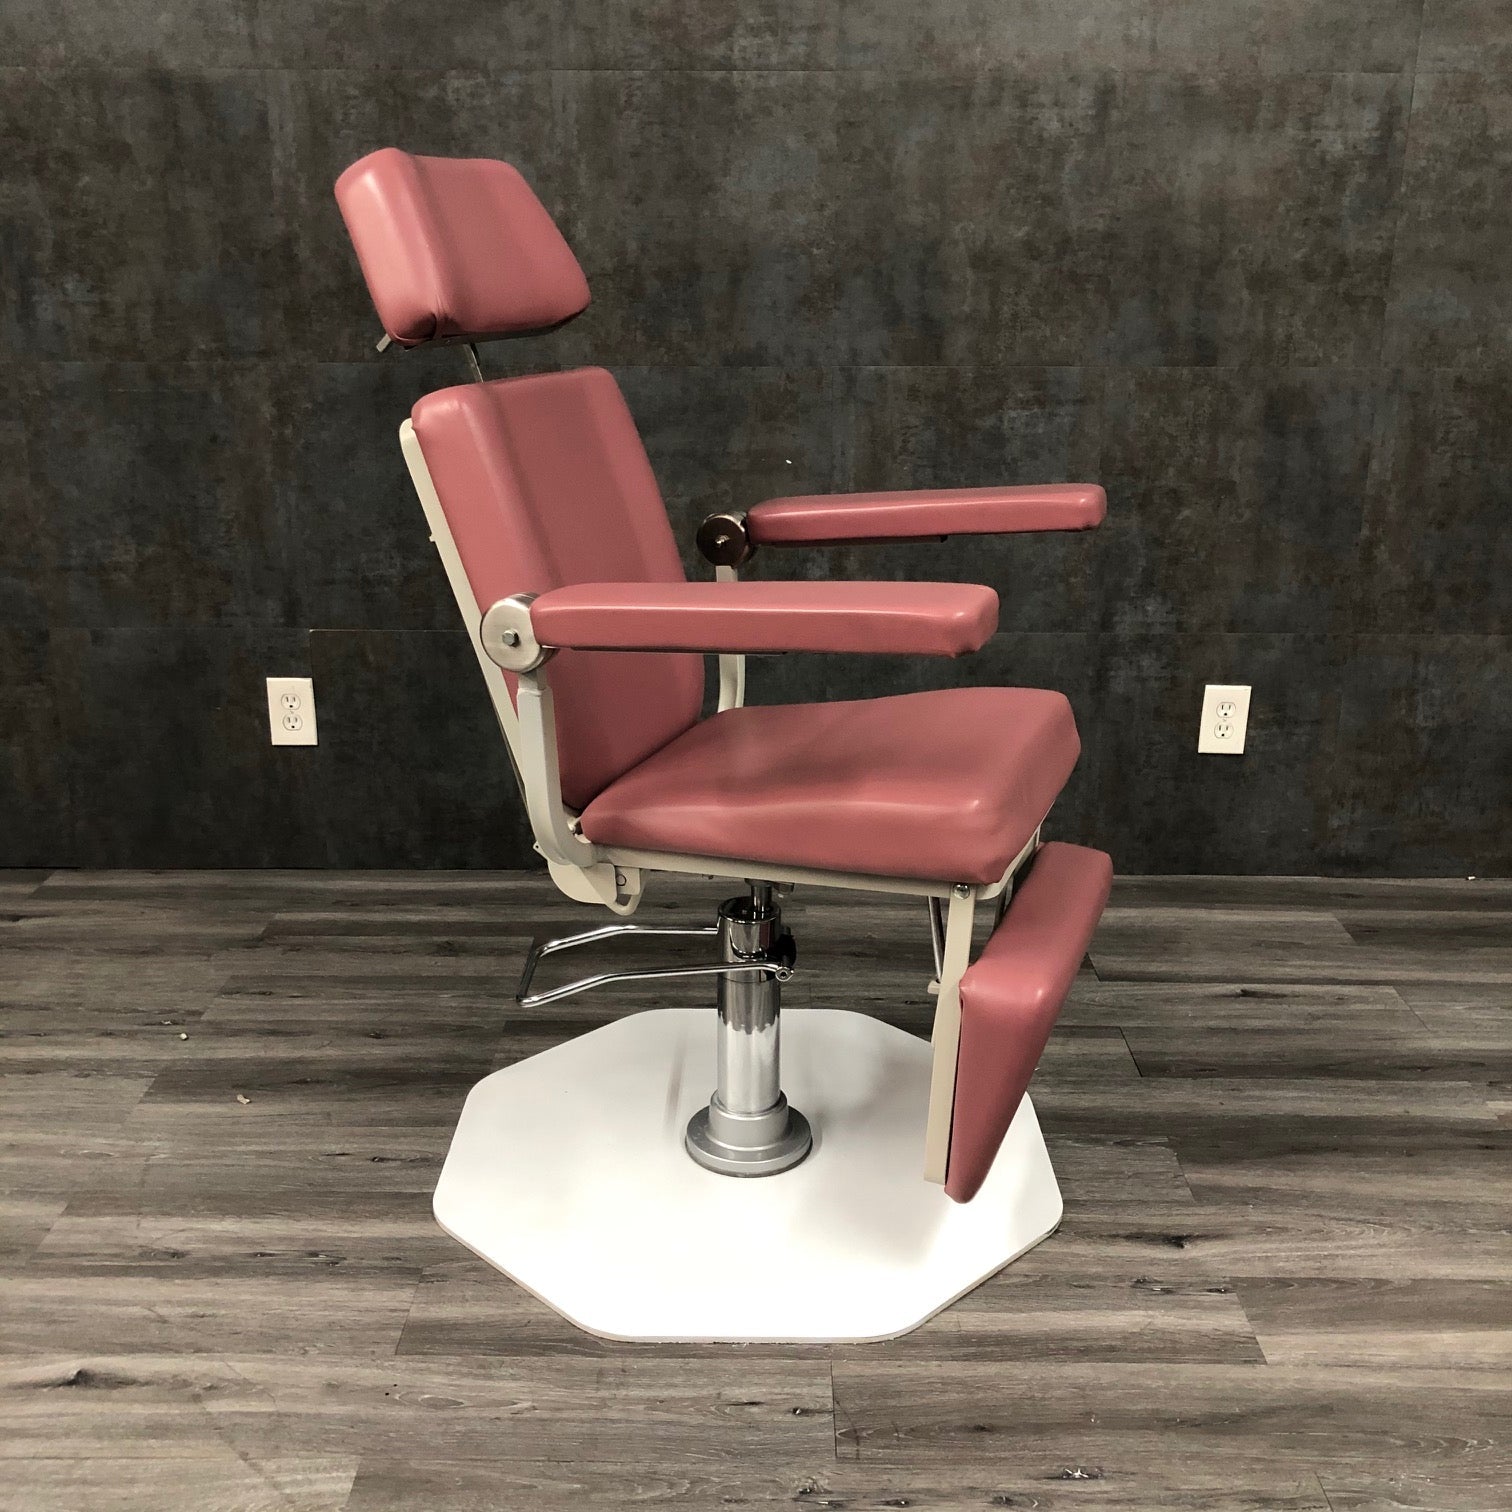 UMF 8612 ENT Exam Chair